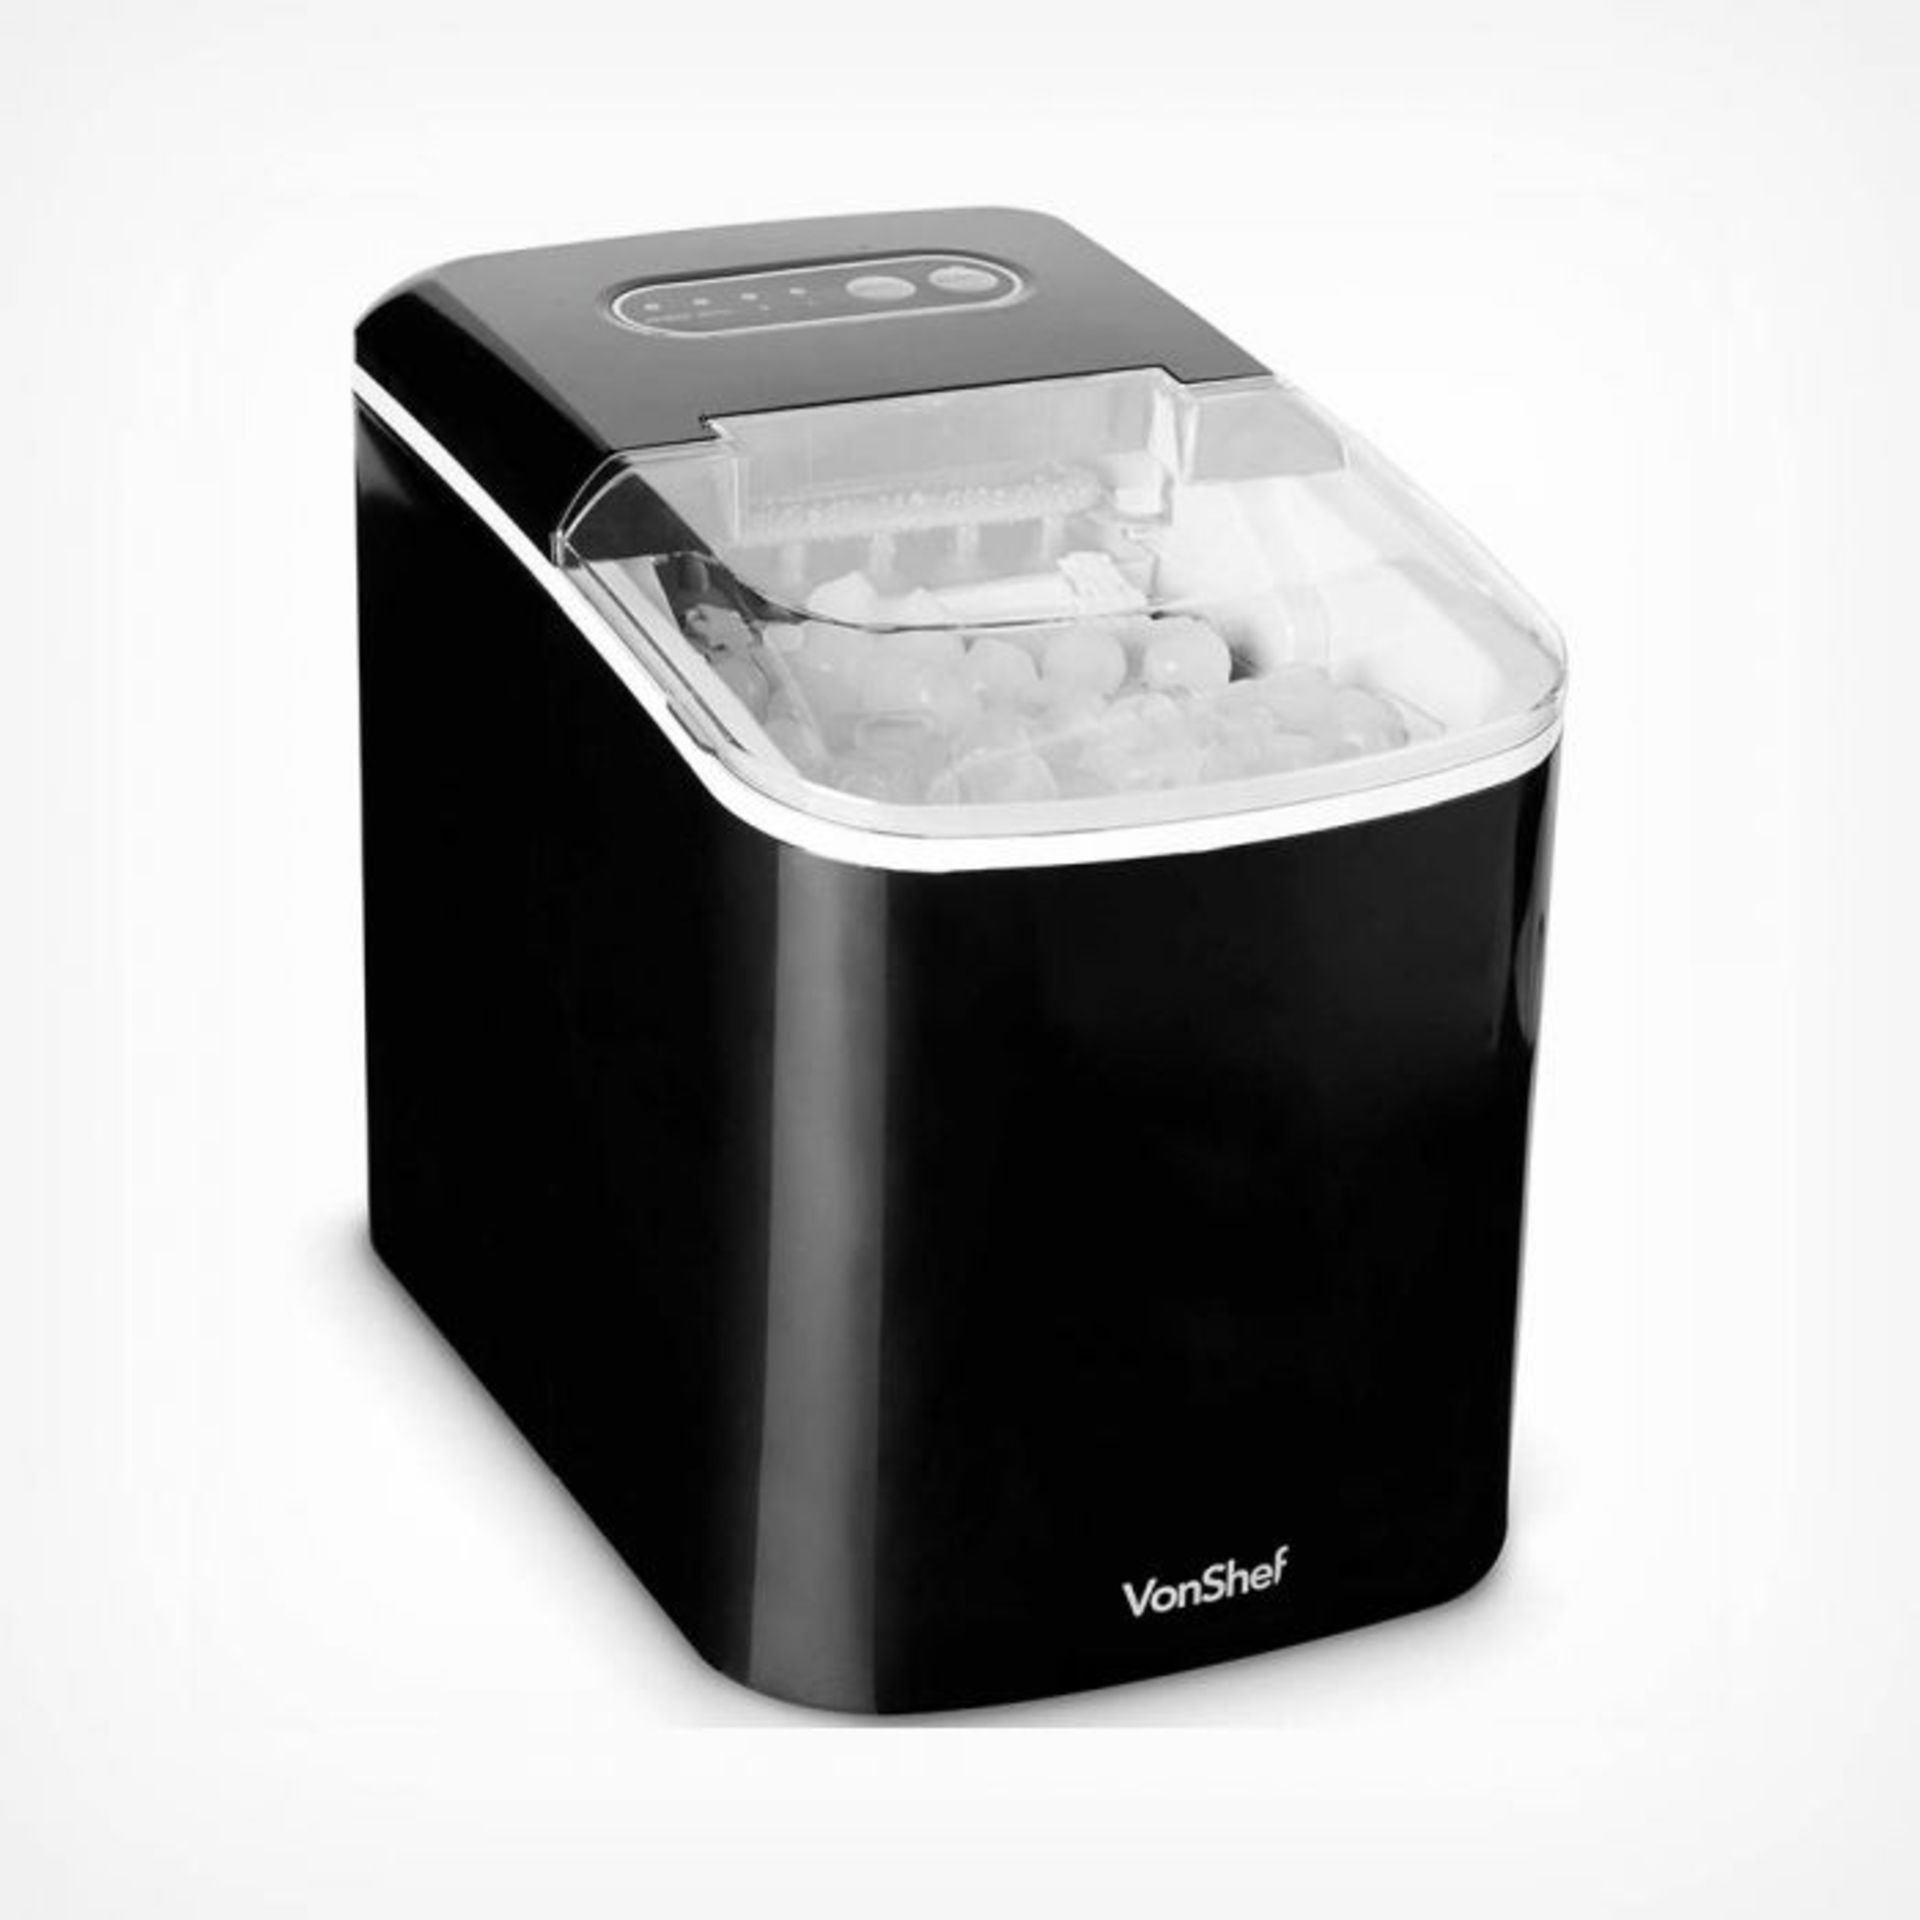 (V30) 2.1L Ice Cube Maker Make up to 72g of ice every 10 minutes thanks to the large 2.1-litre...